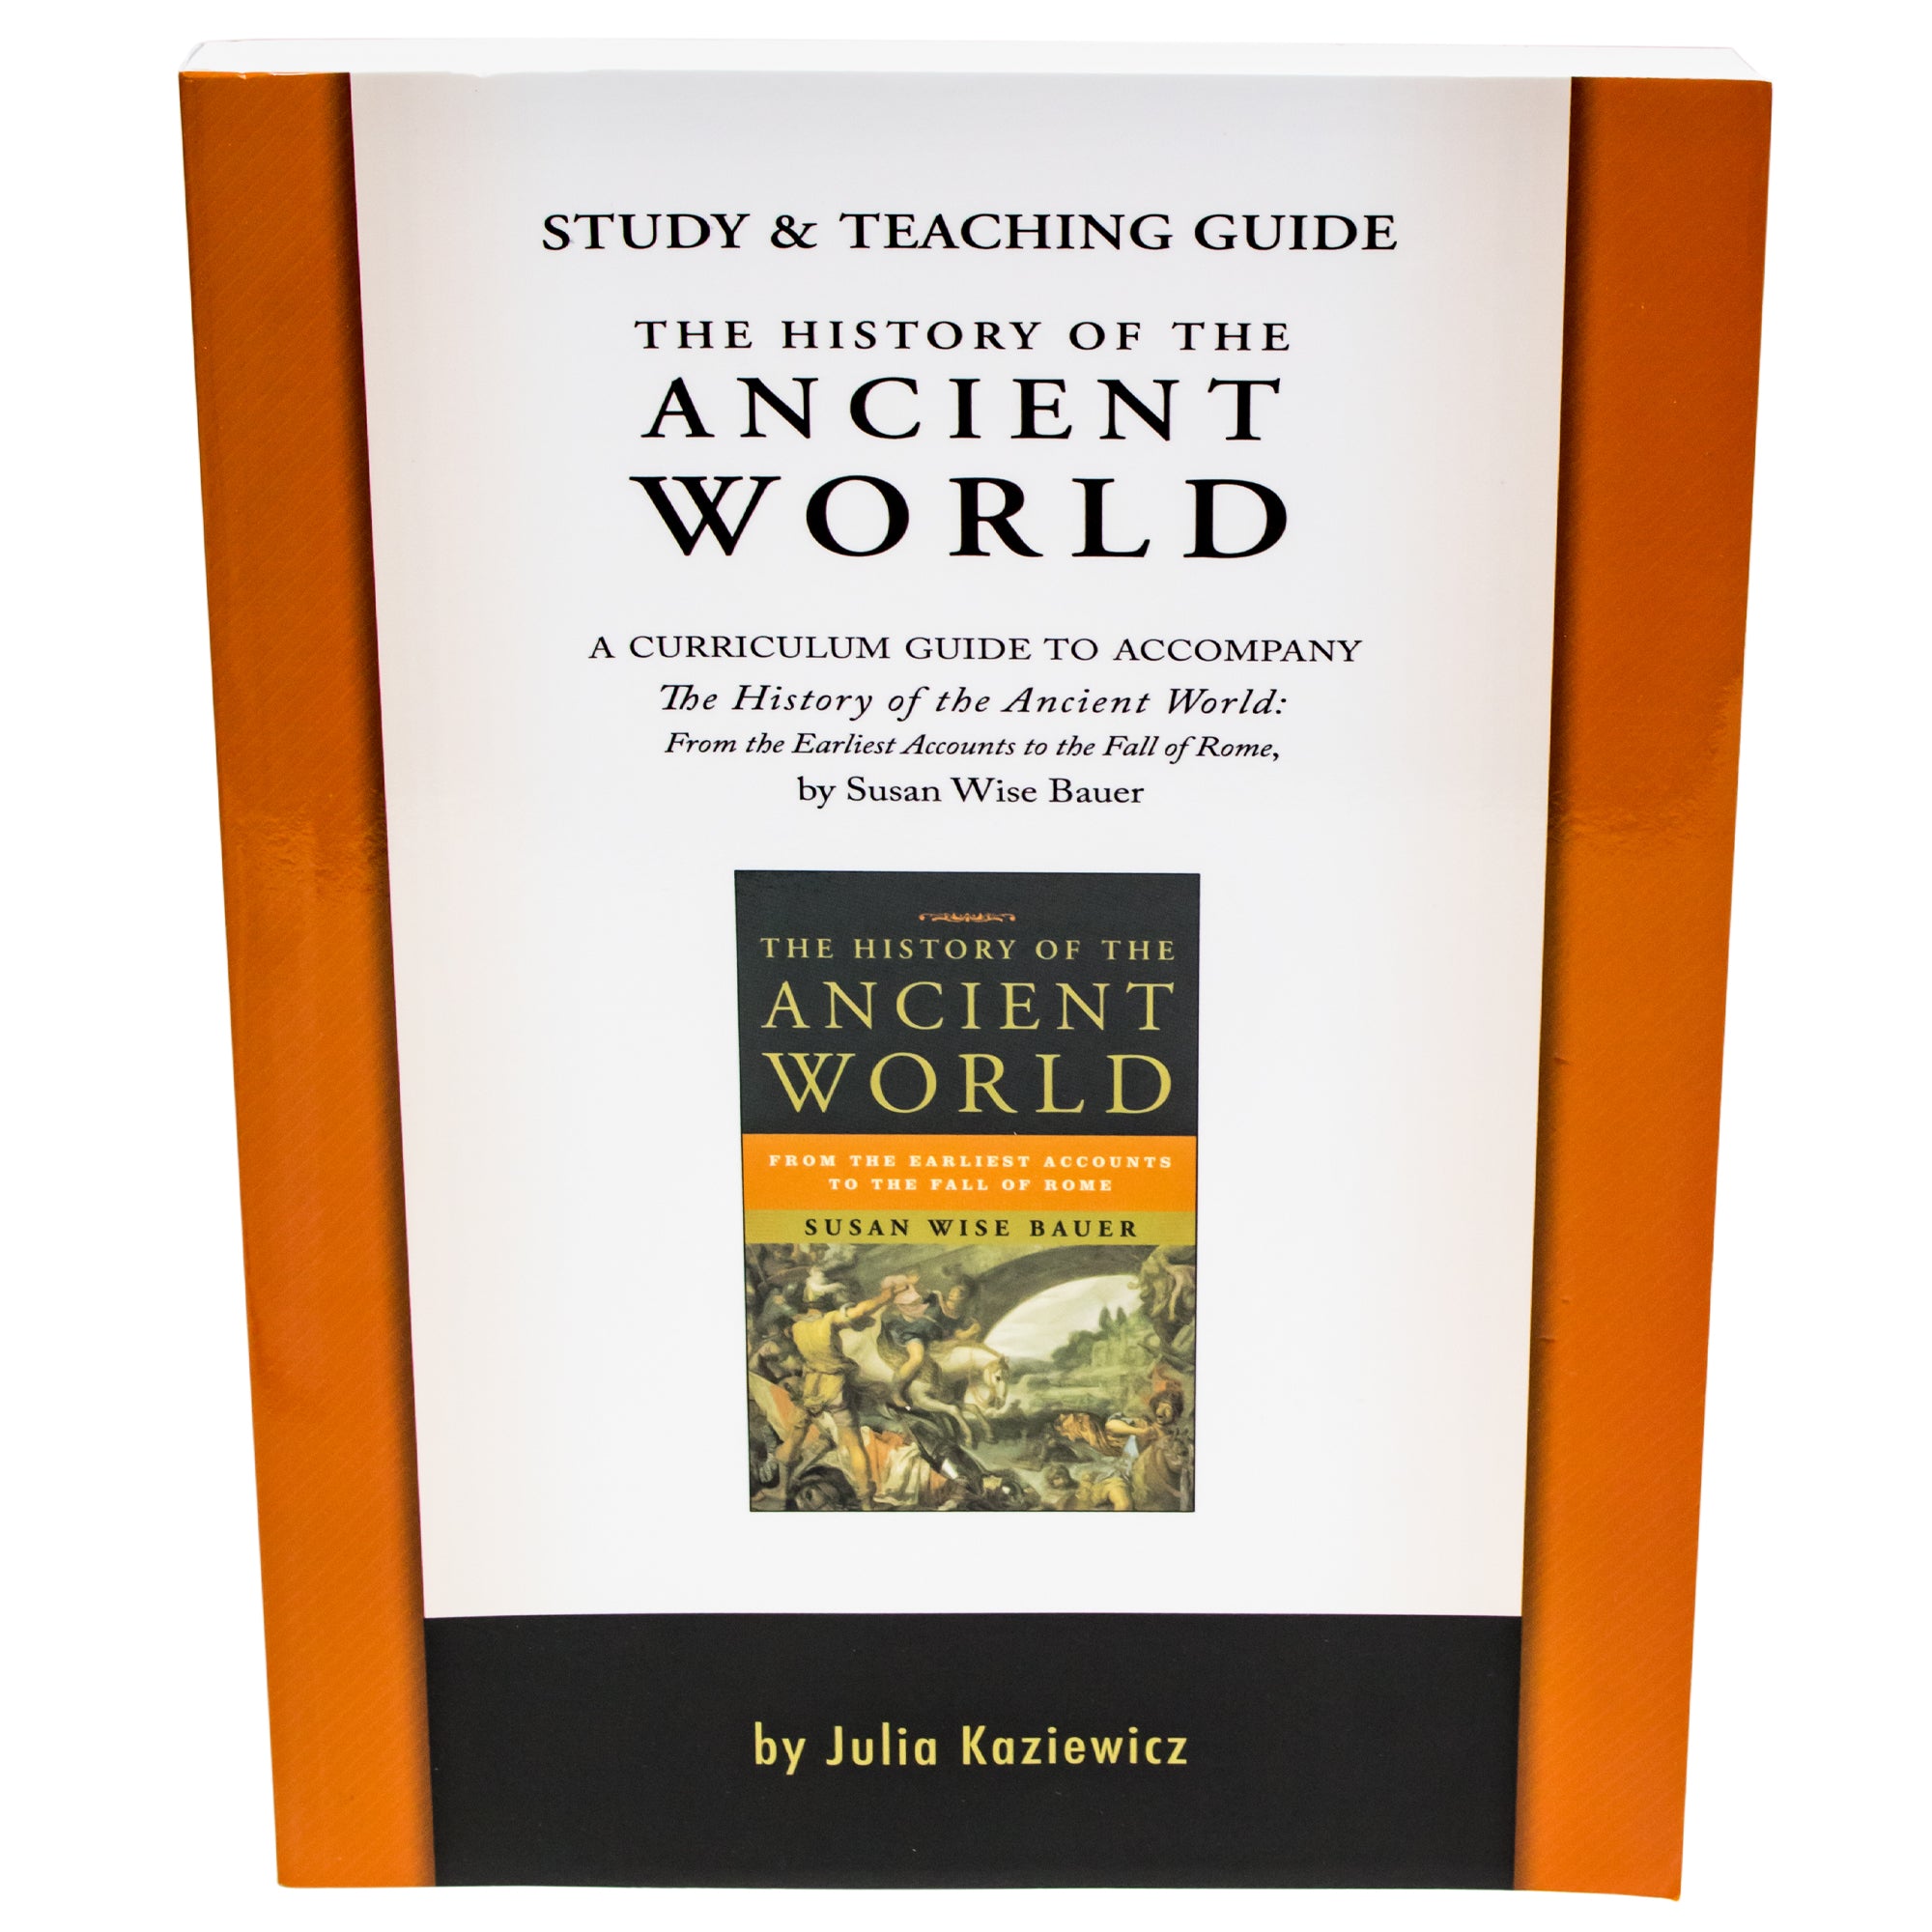 The History of the Ancient World Study Guide cover. The cover is mostly white in the middle with a black bottom and orange borders on each side. In the middle is a picture of the History of the Ancient World book. This book is black, orange and has a painting of a battle on the bottom. Along with the title at the top is text reading “Study and Teaching Guide. A curriculum guide to accompany The History of the Ancient World, From the Earliest Accounts to the Fall of Rome.” By Julia Kaziewicz.